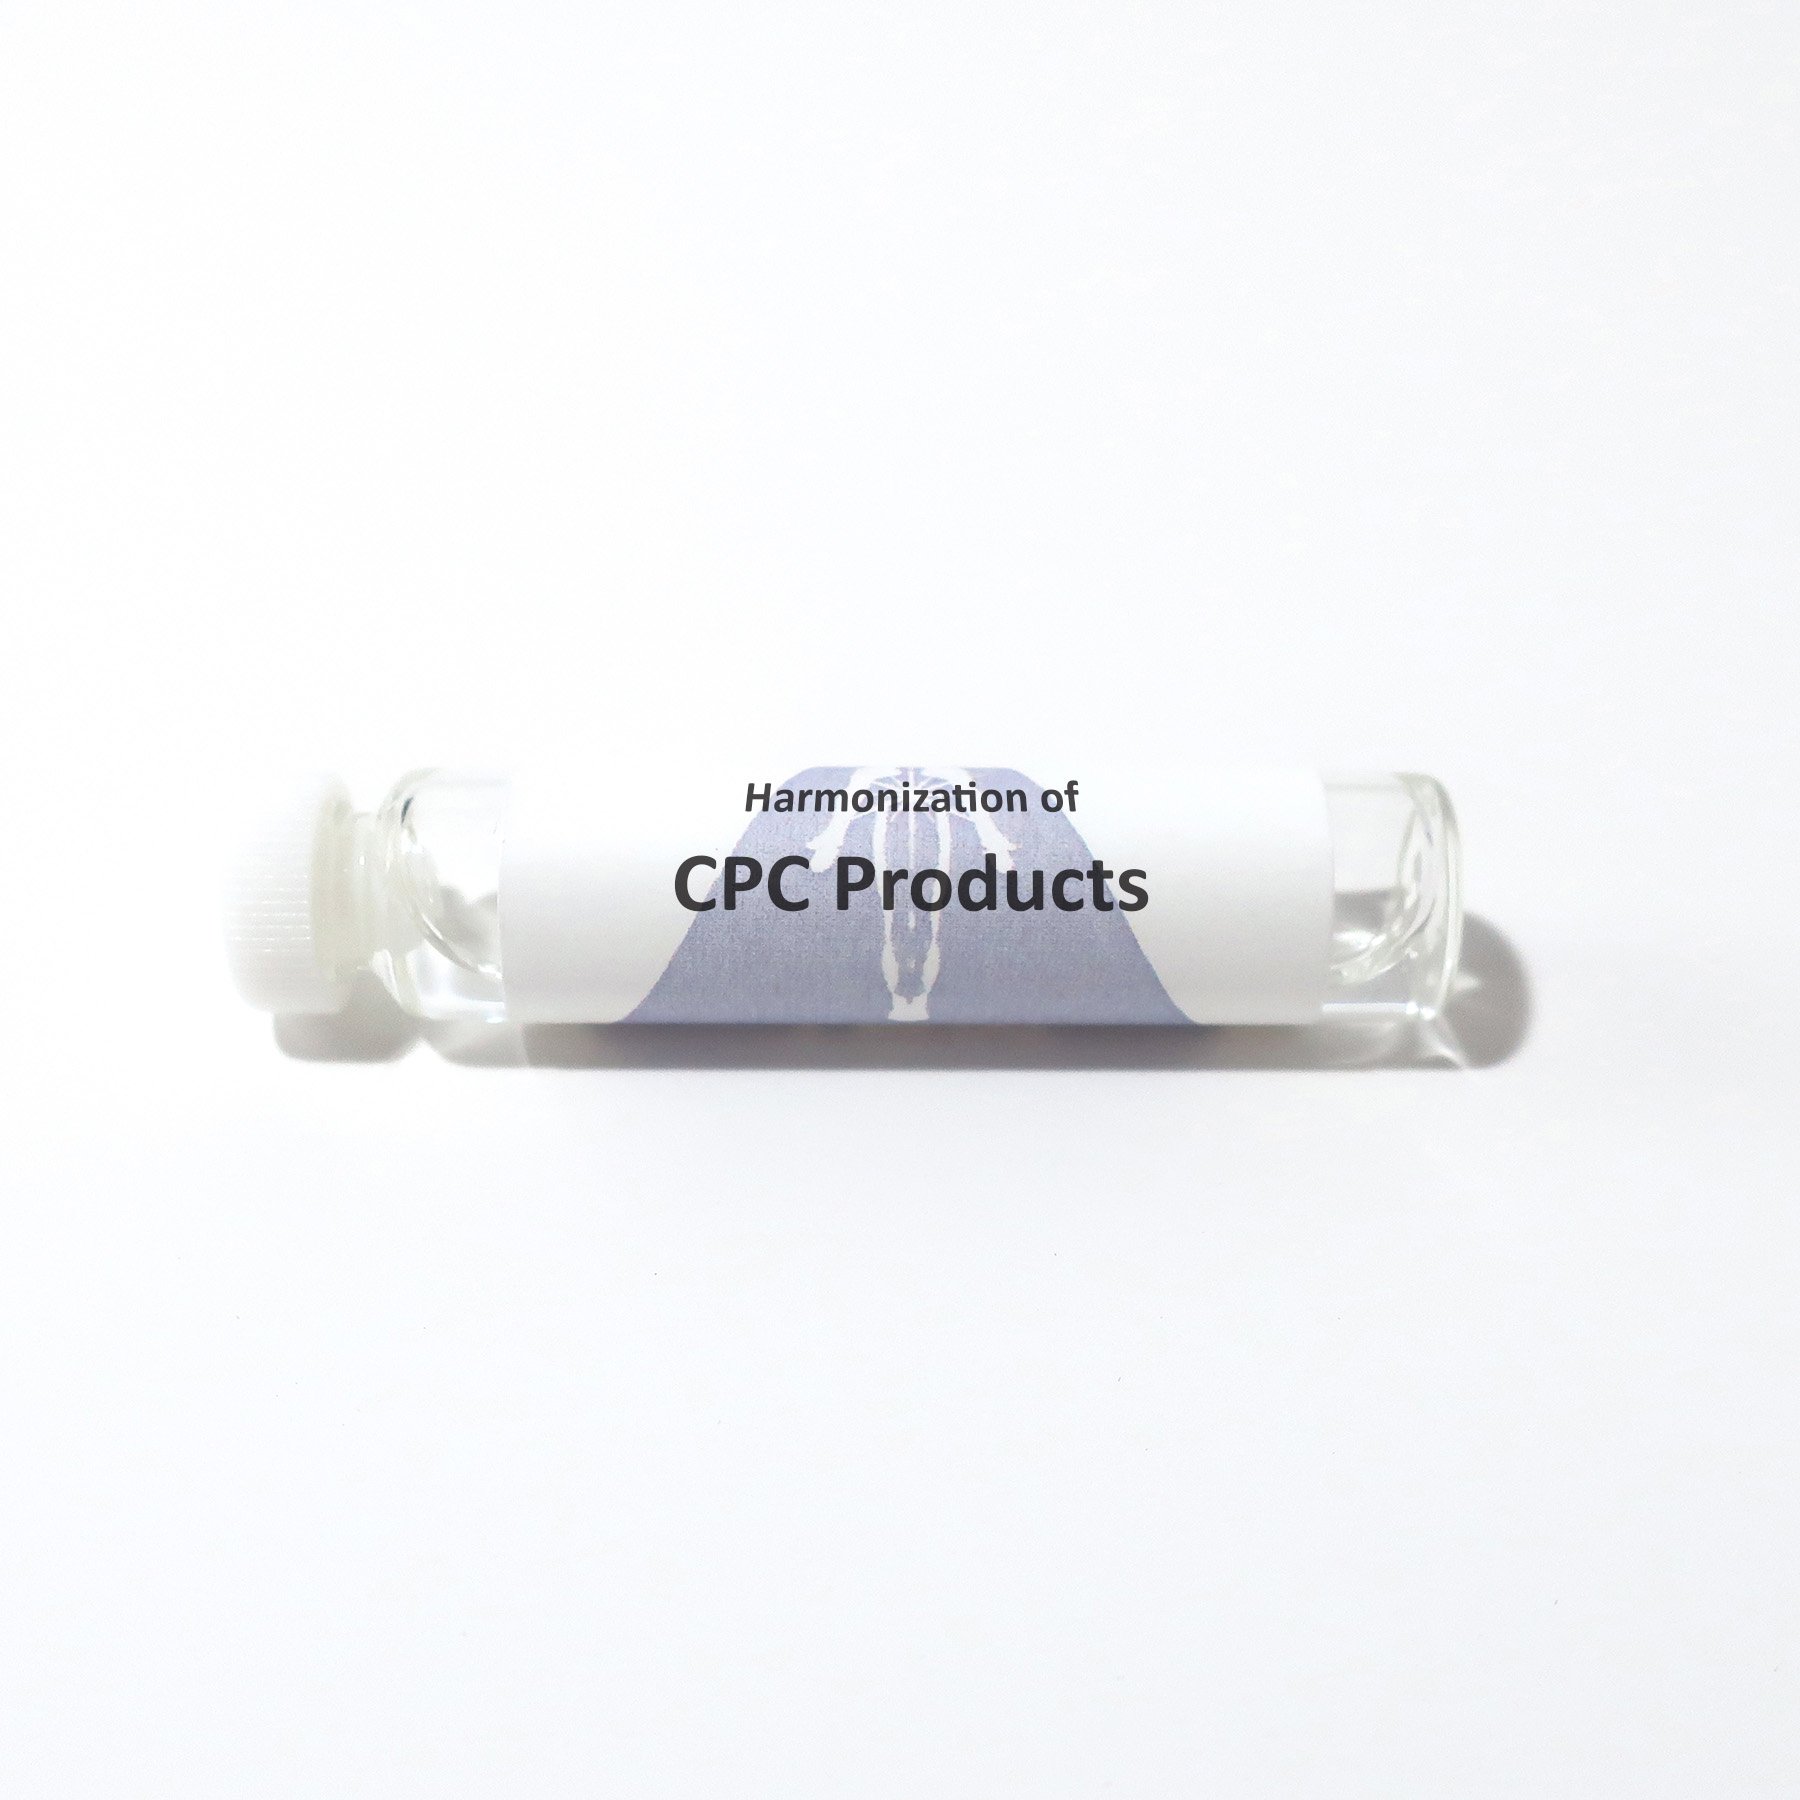 CPC Products